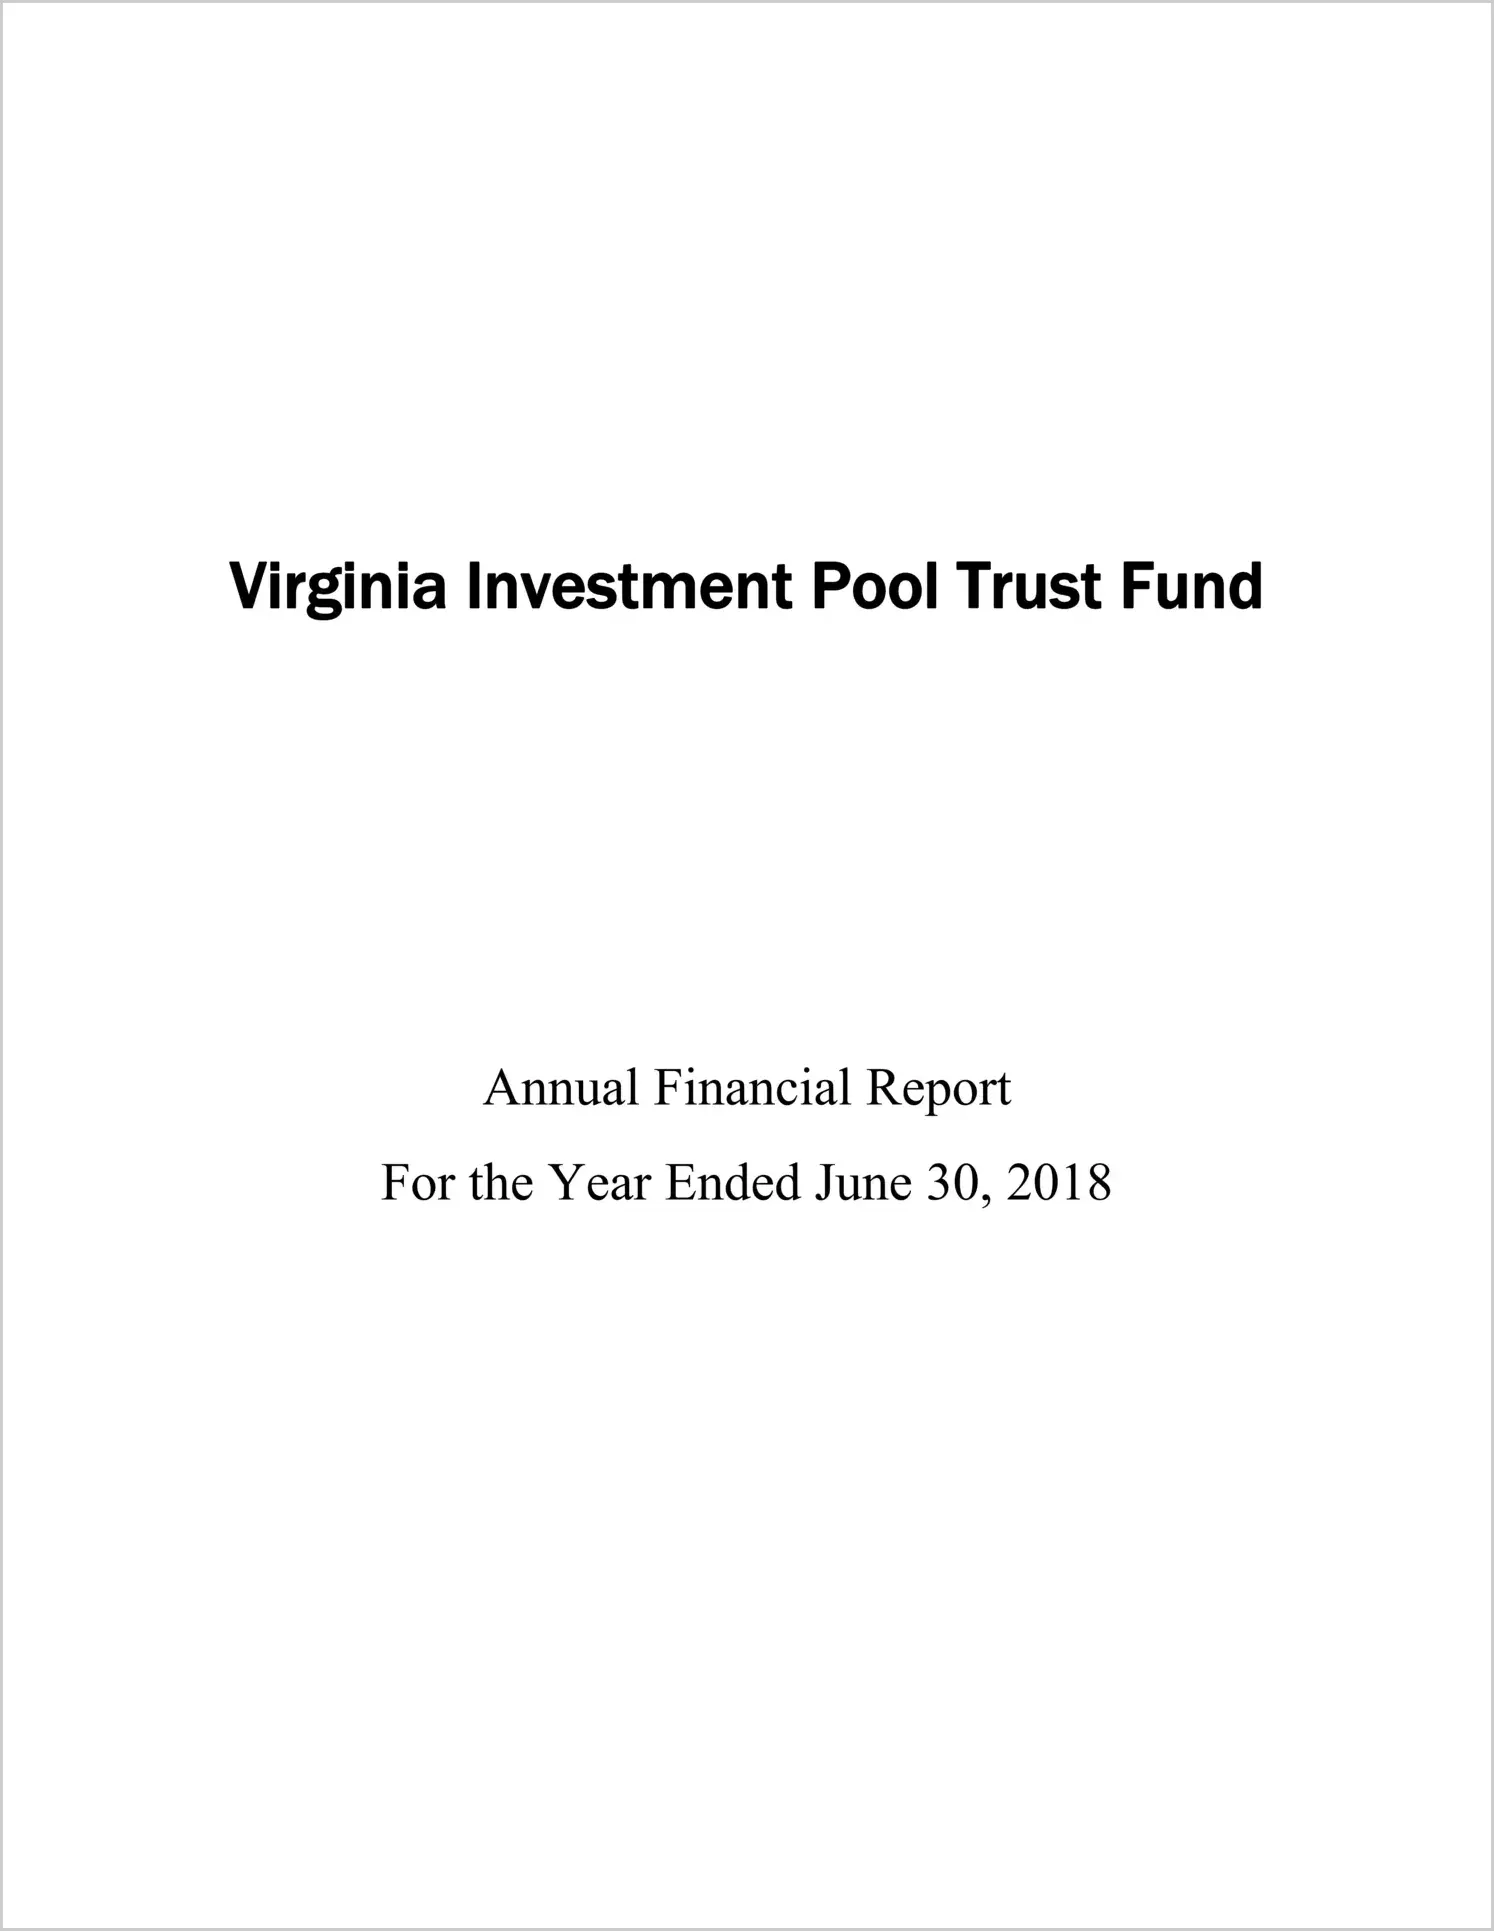 2018 ABC/Other Annual Financial Report  for Virginia Investment Pool Trust Fund